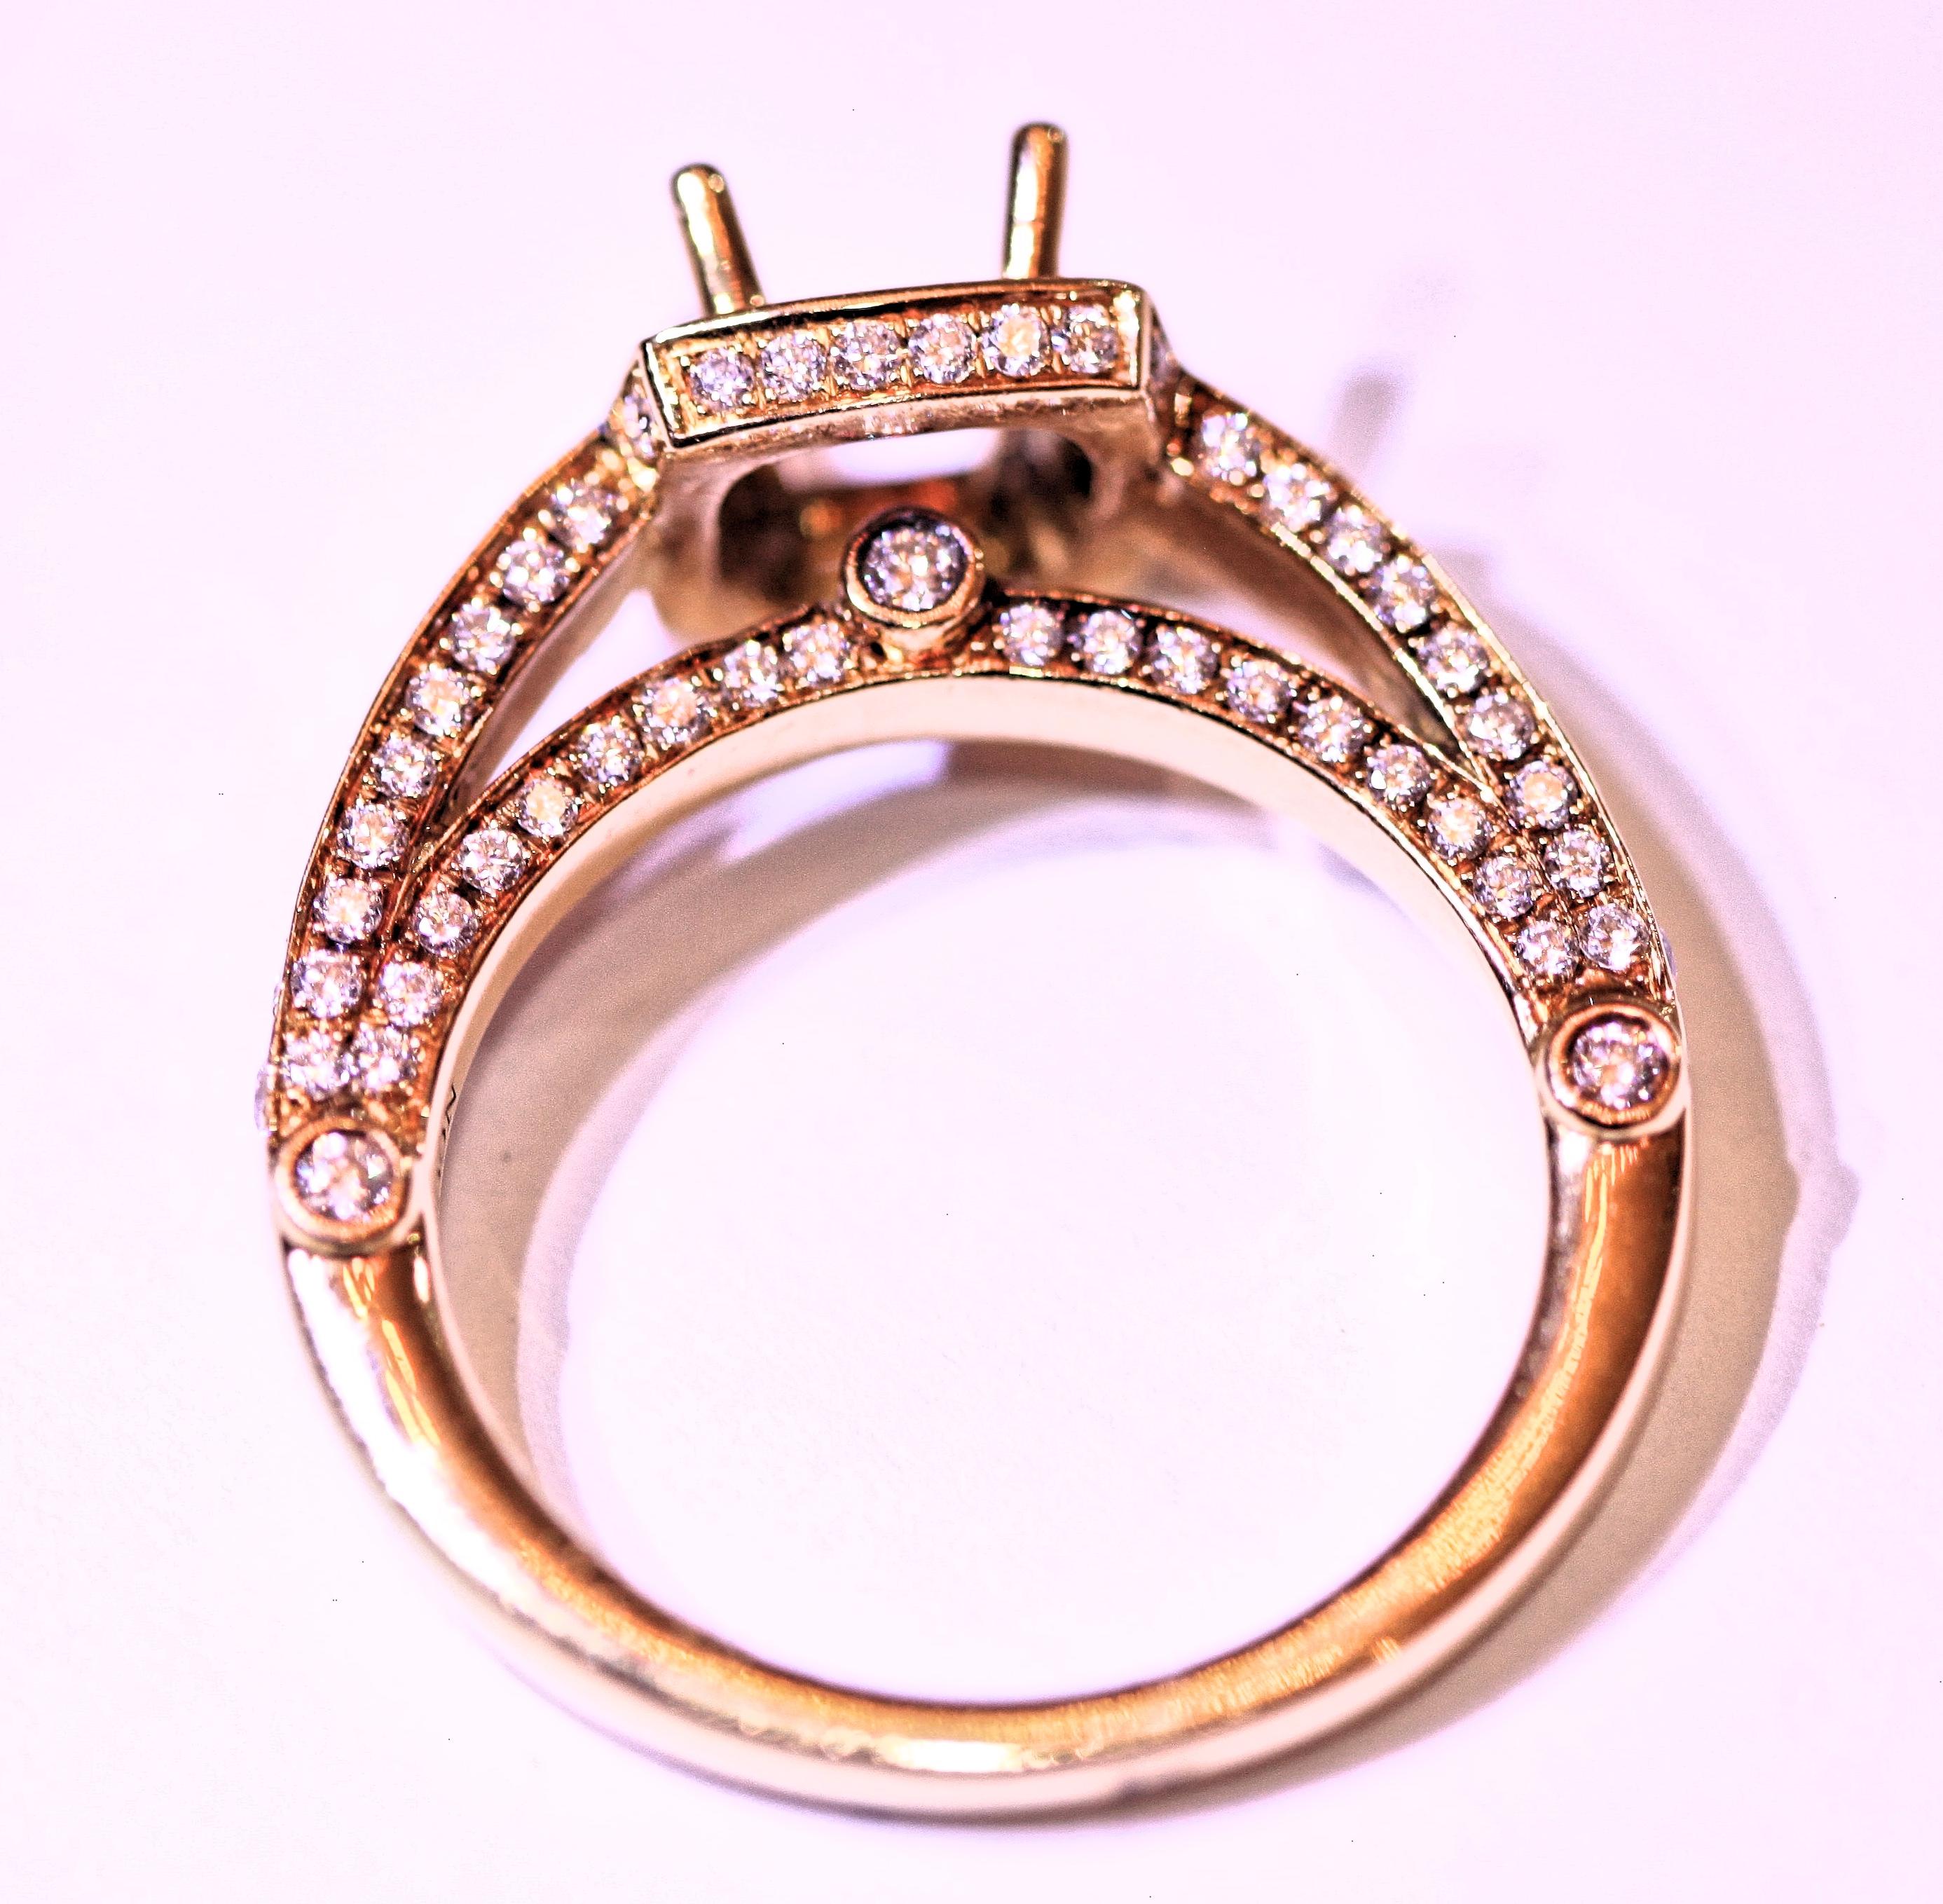 Ladies 18 karat yellow gold diamond engagement ring or right hand ring.  The ring has 1.14 carats
total weight of round brilliant cut diamonds.  The diamonds are white in color and VS-I in clarity.
The ring will hold a 6 1/2 mm center stone and the